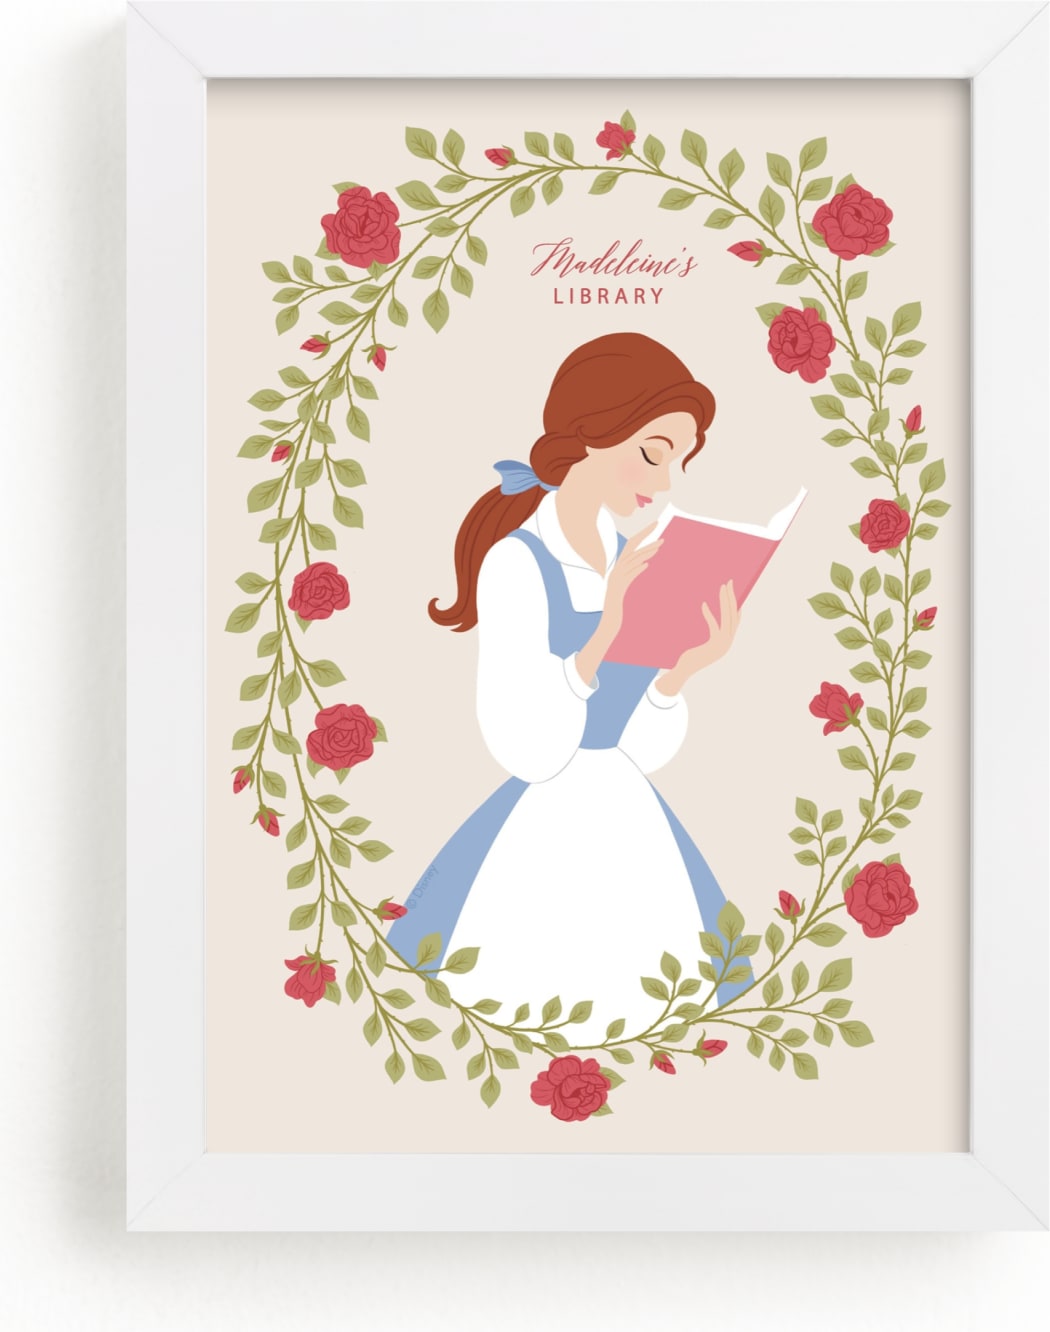 This is a colorful disney art by Jamie Alexander called Disney's Belle Library.